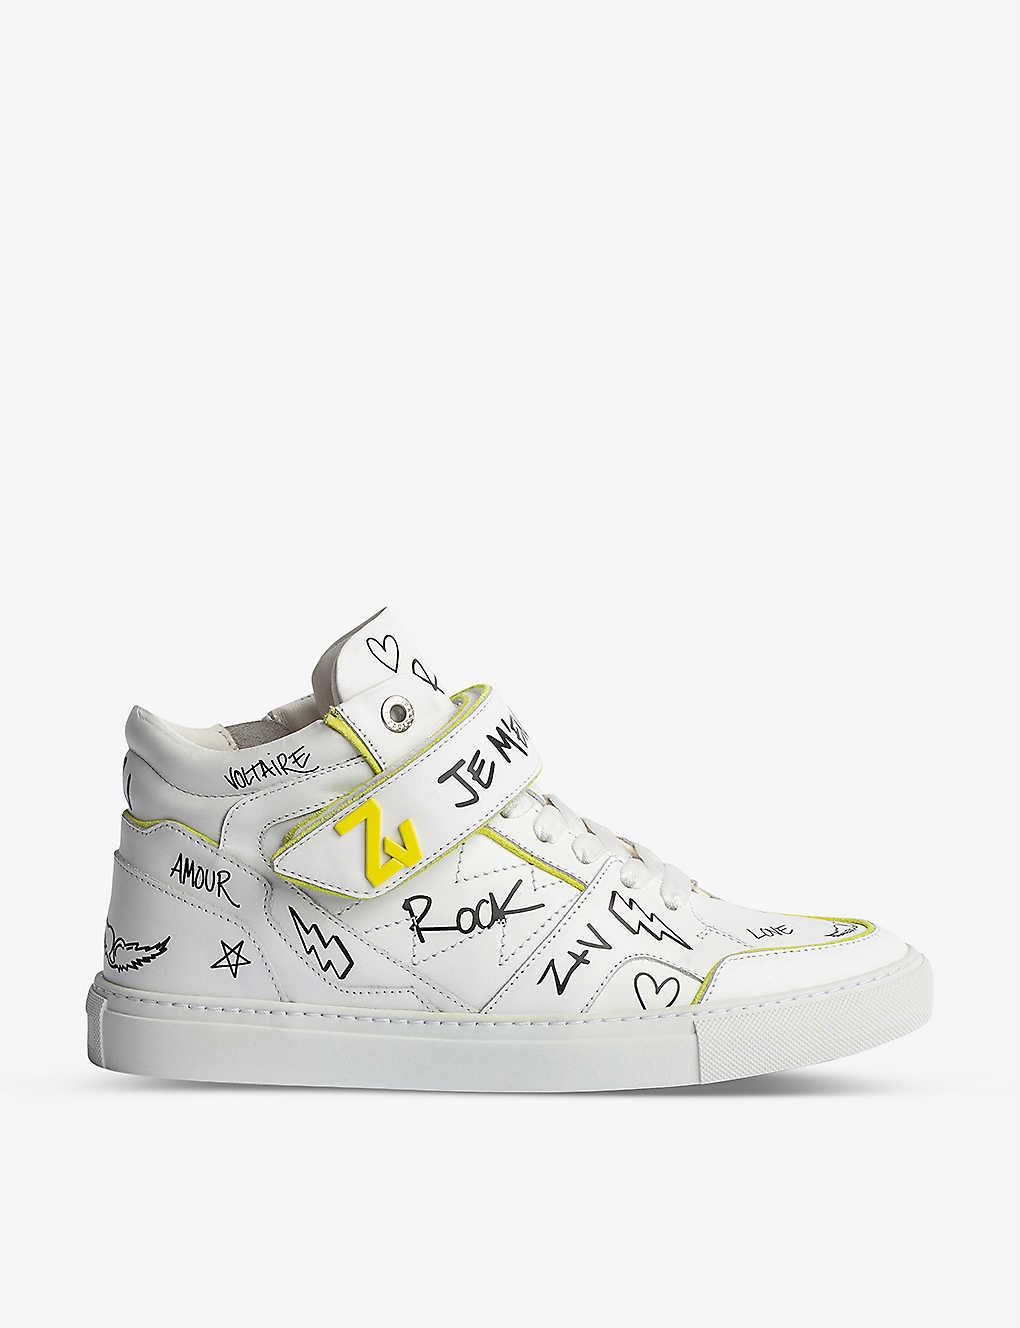 Zadig & Voltaire Zv1747 Mid-flash Graffiti-art Leather Trainers in ...